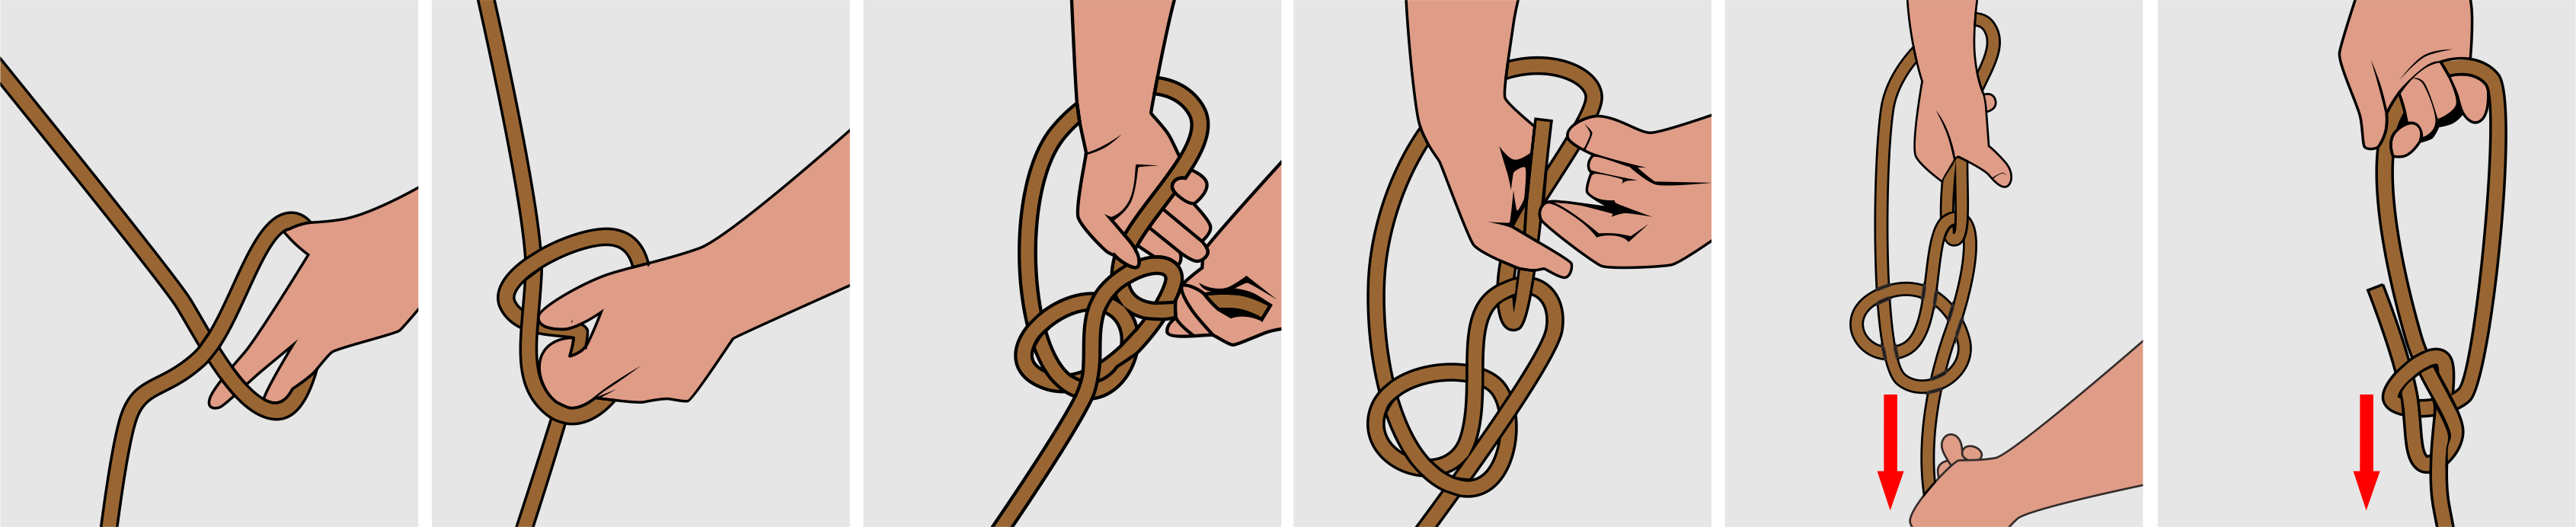 how to tie a bowline fast